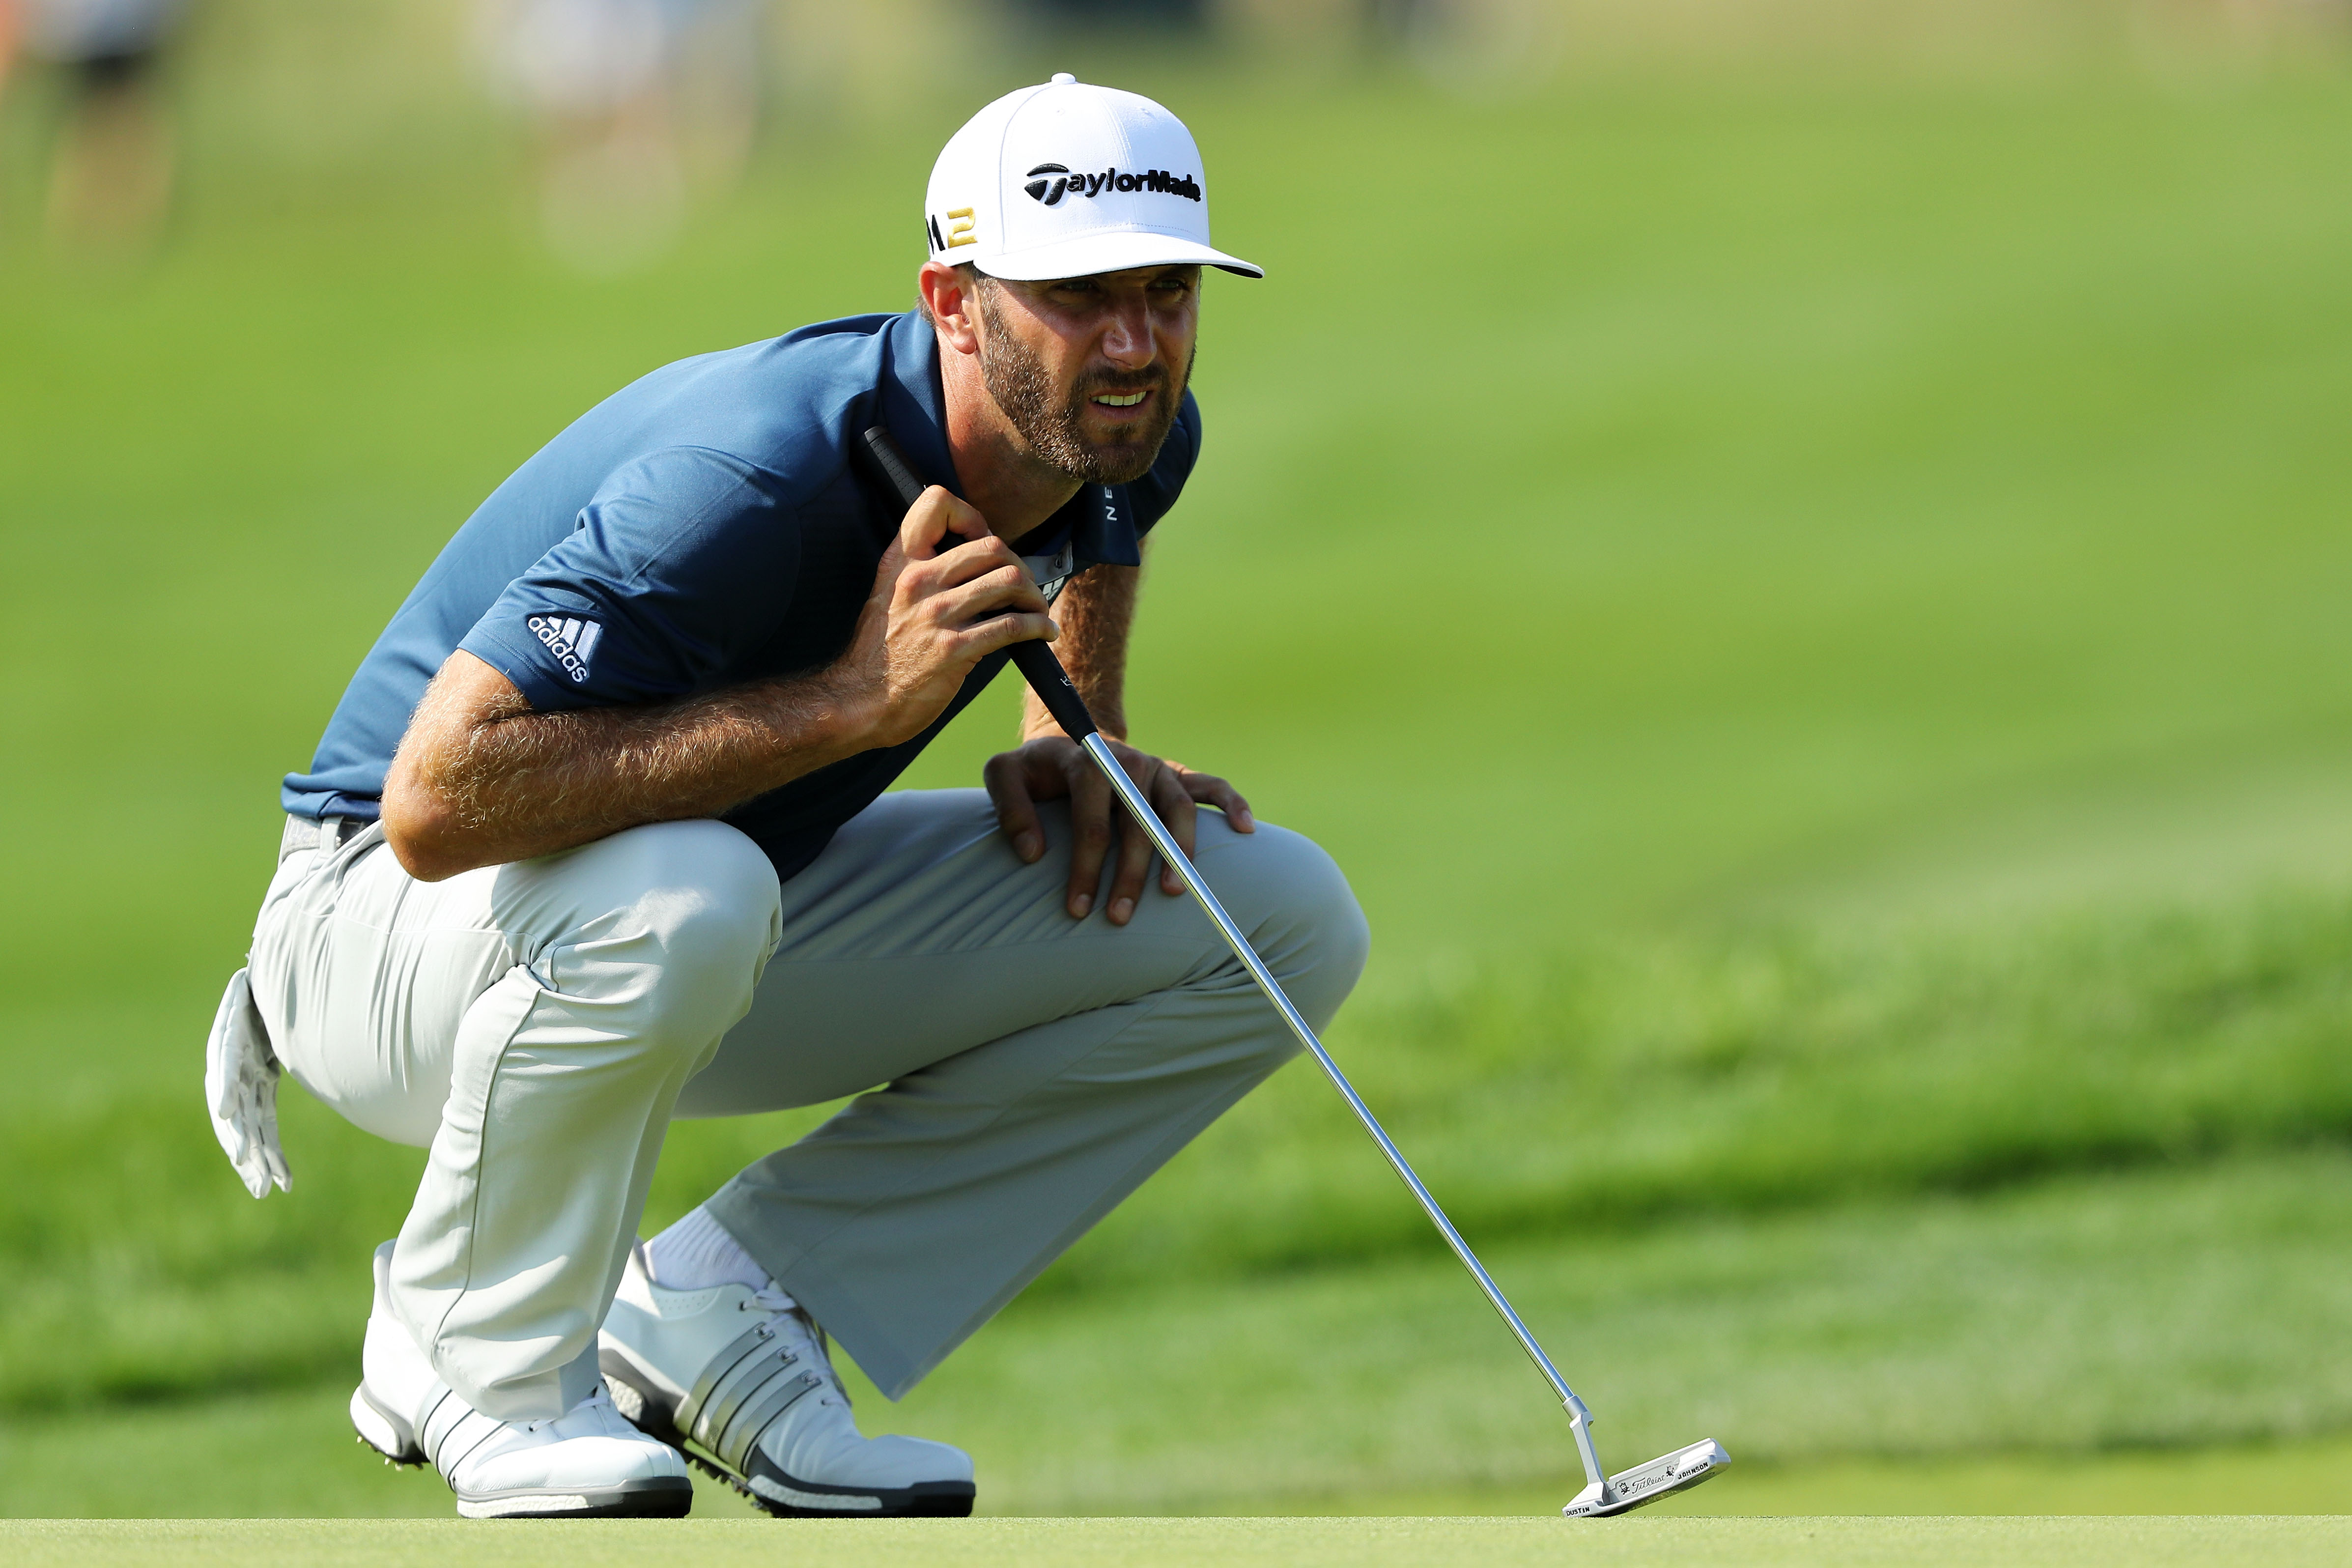 WATCH Dustin Johnson Touches Ball With Putter 5th Green